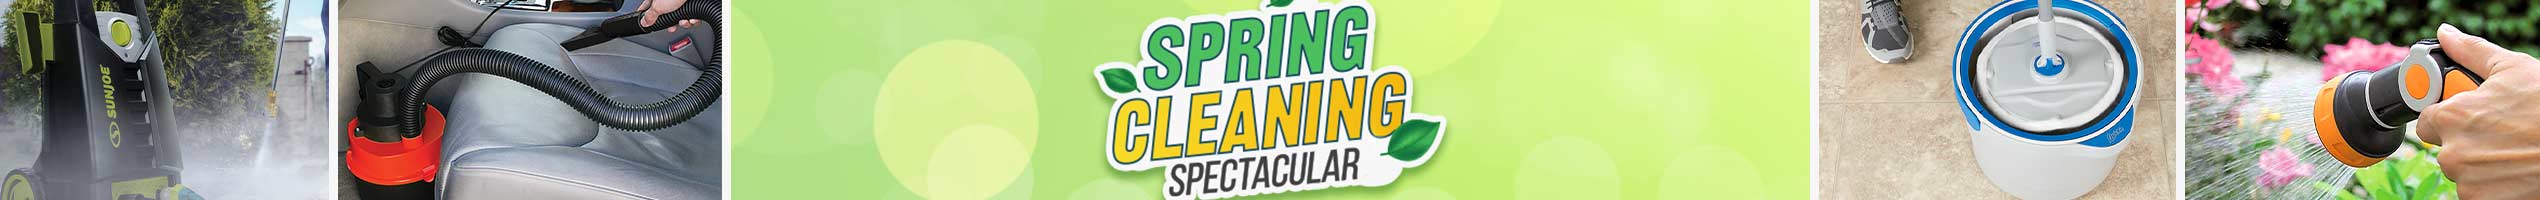 Spring Cleaning Spectacular